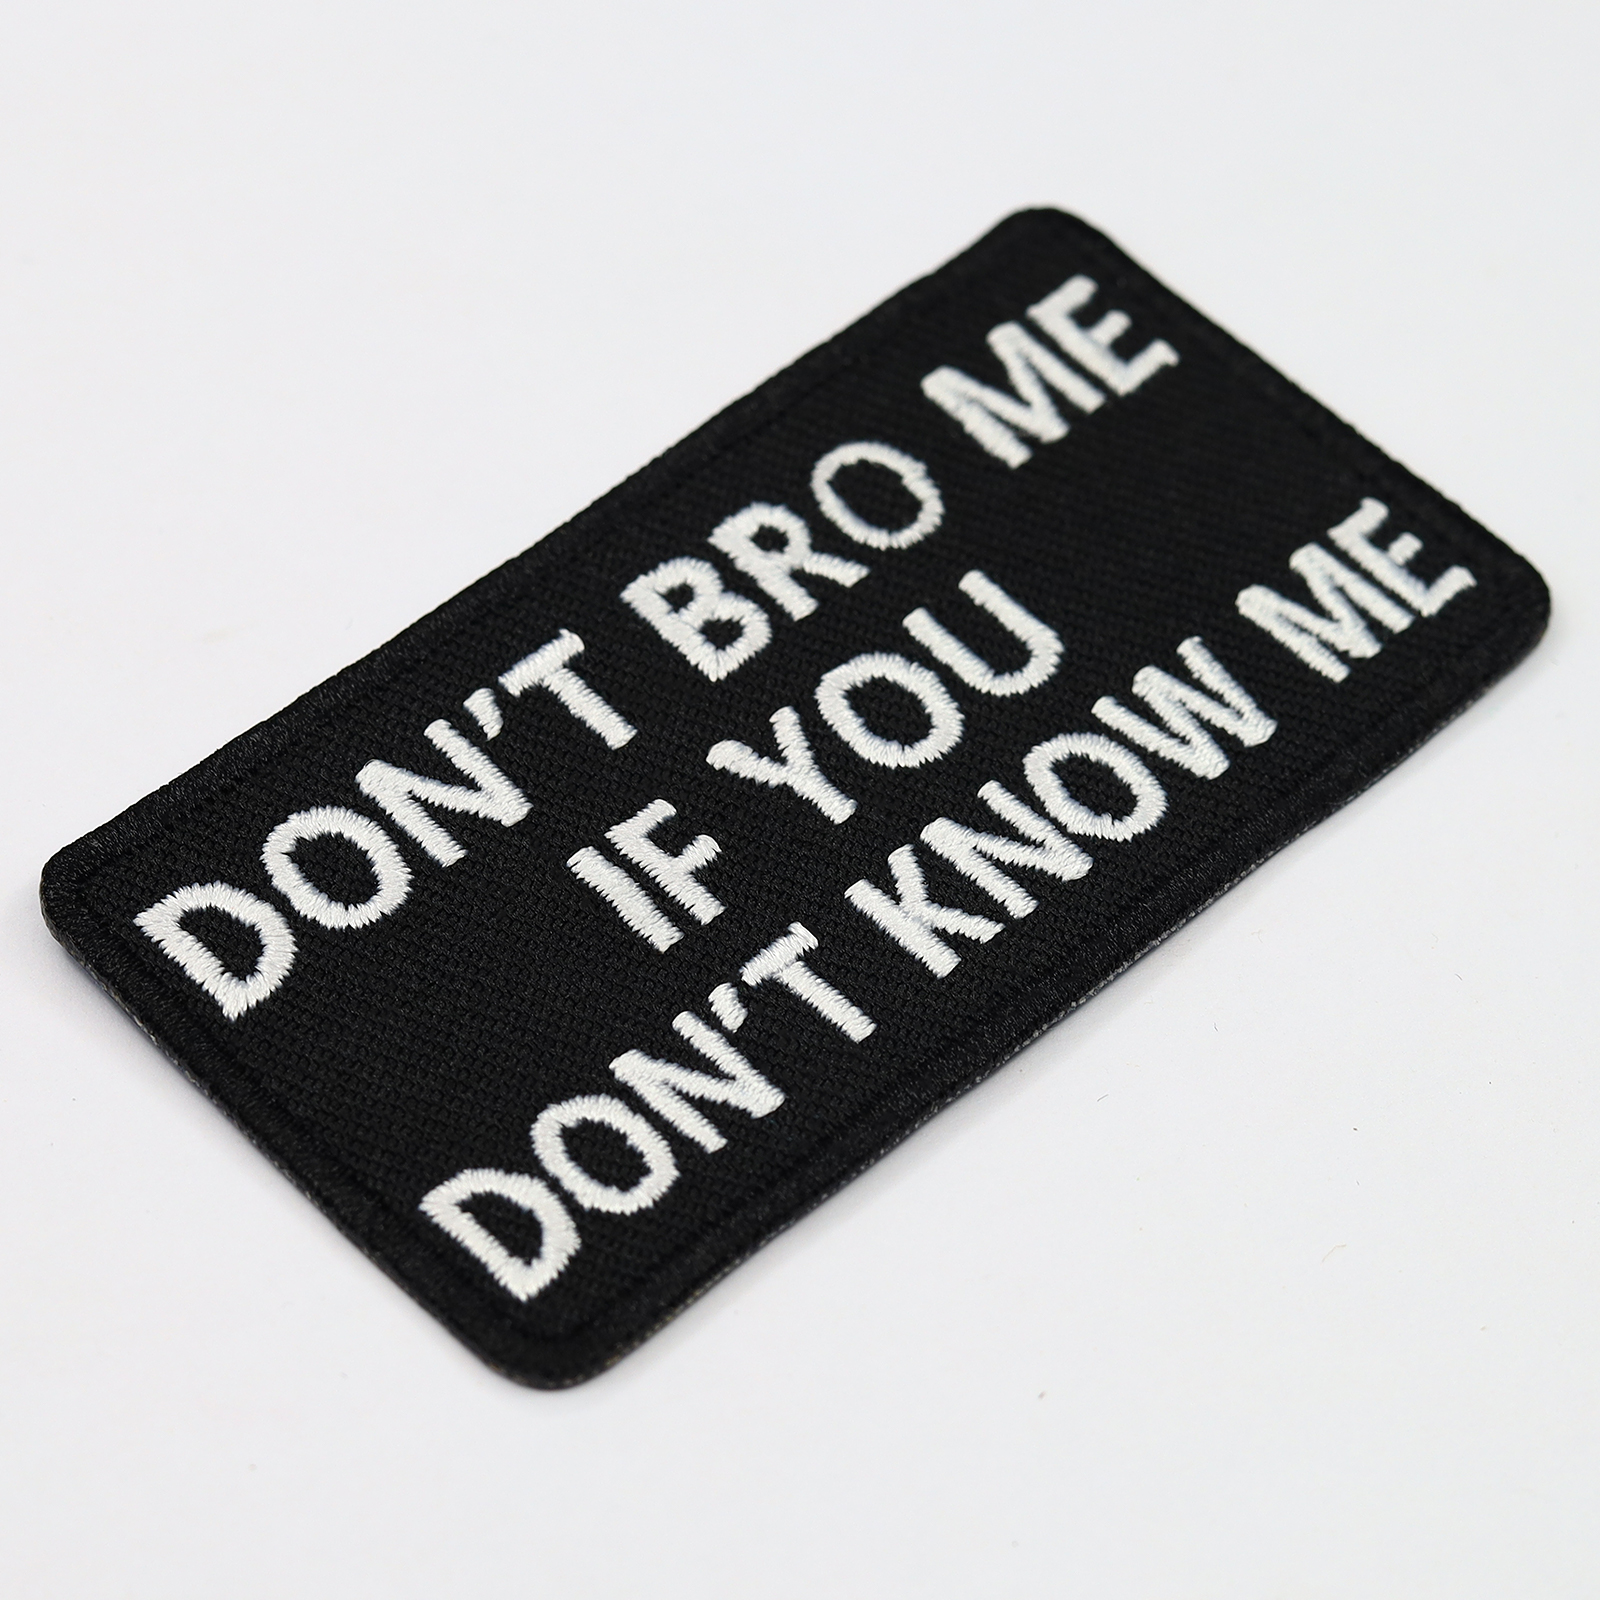 Don't bro me if you don't know me - Patch